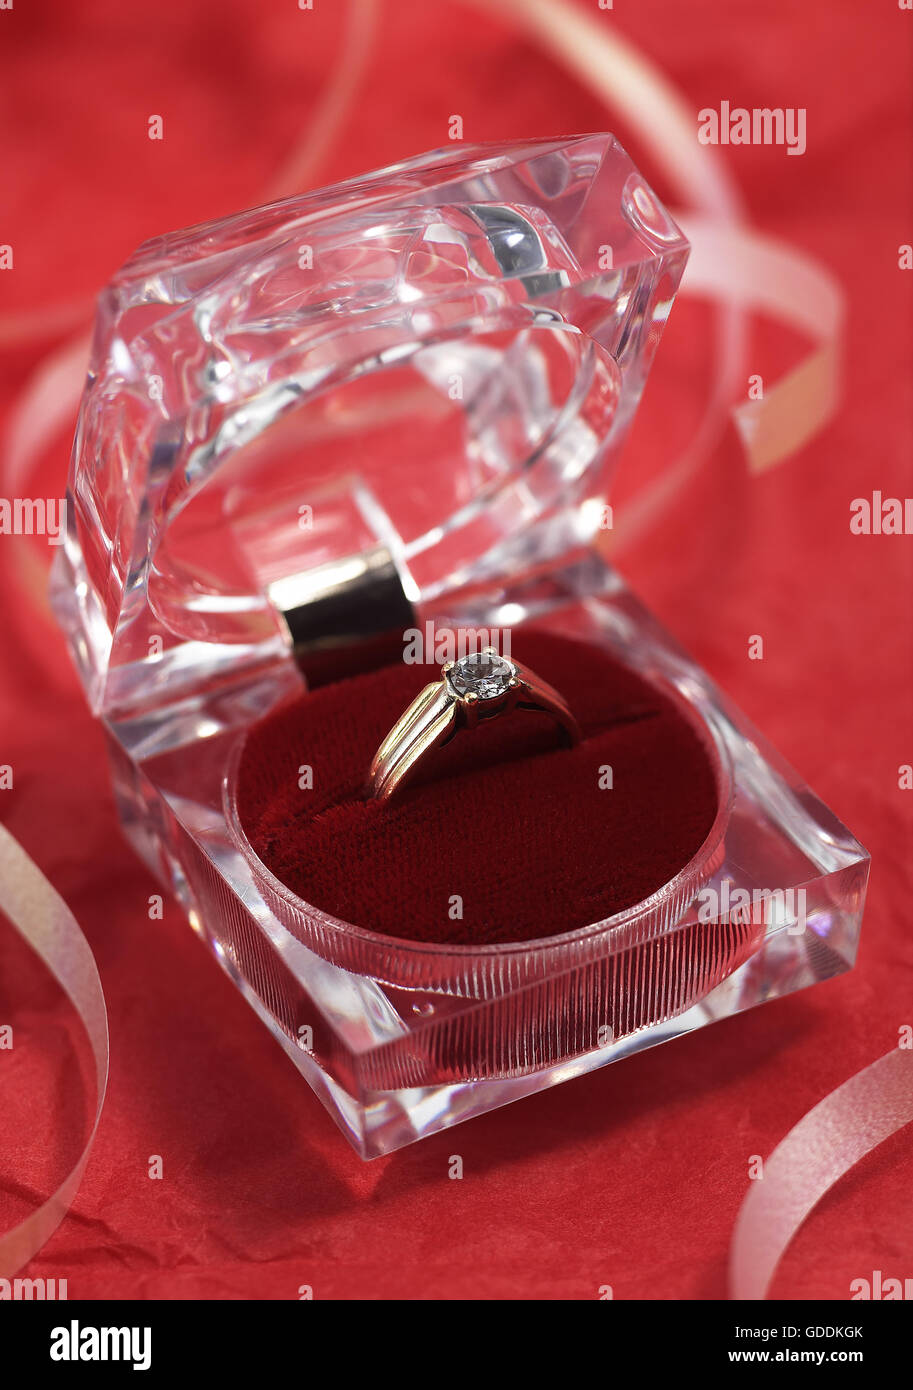 DIAMOND RING OFFERED ON VALENTINE'S DAY Stock Photo